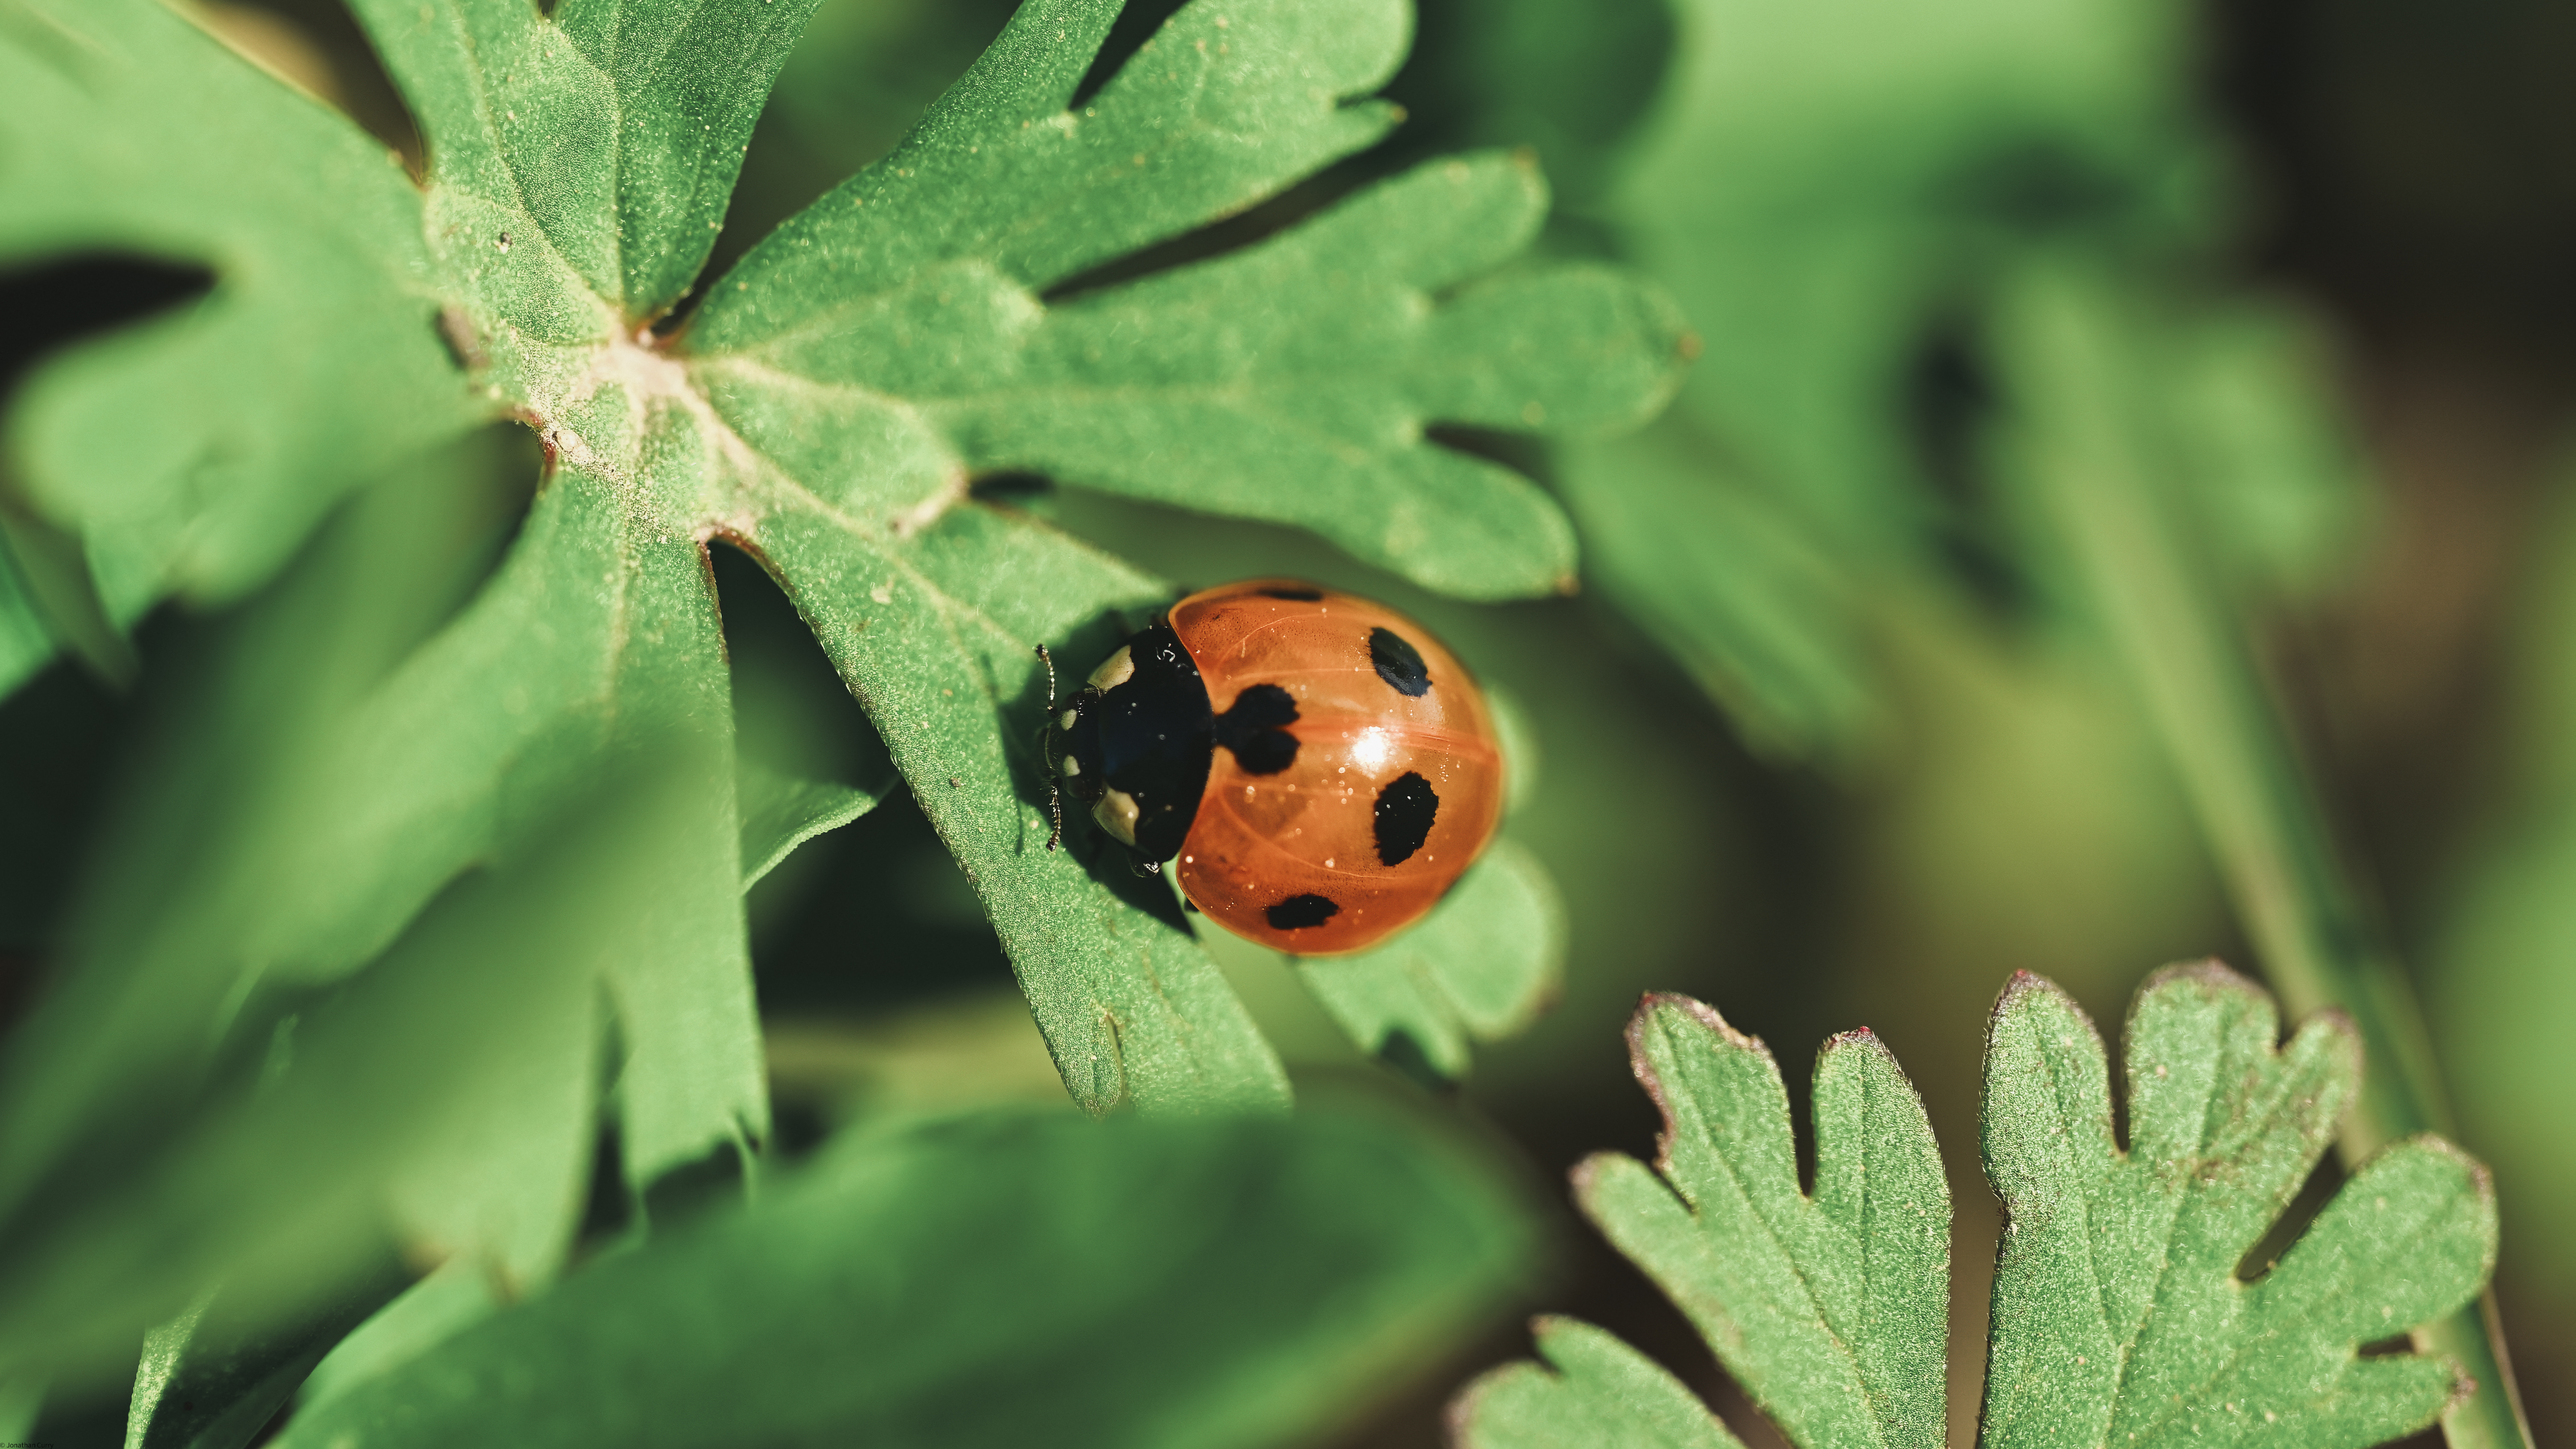 General 6016x3384 Jonathan Curry nature macro photography plants insect bug ladybugs outdoors leaves